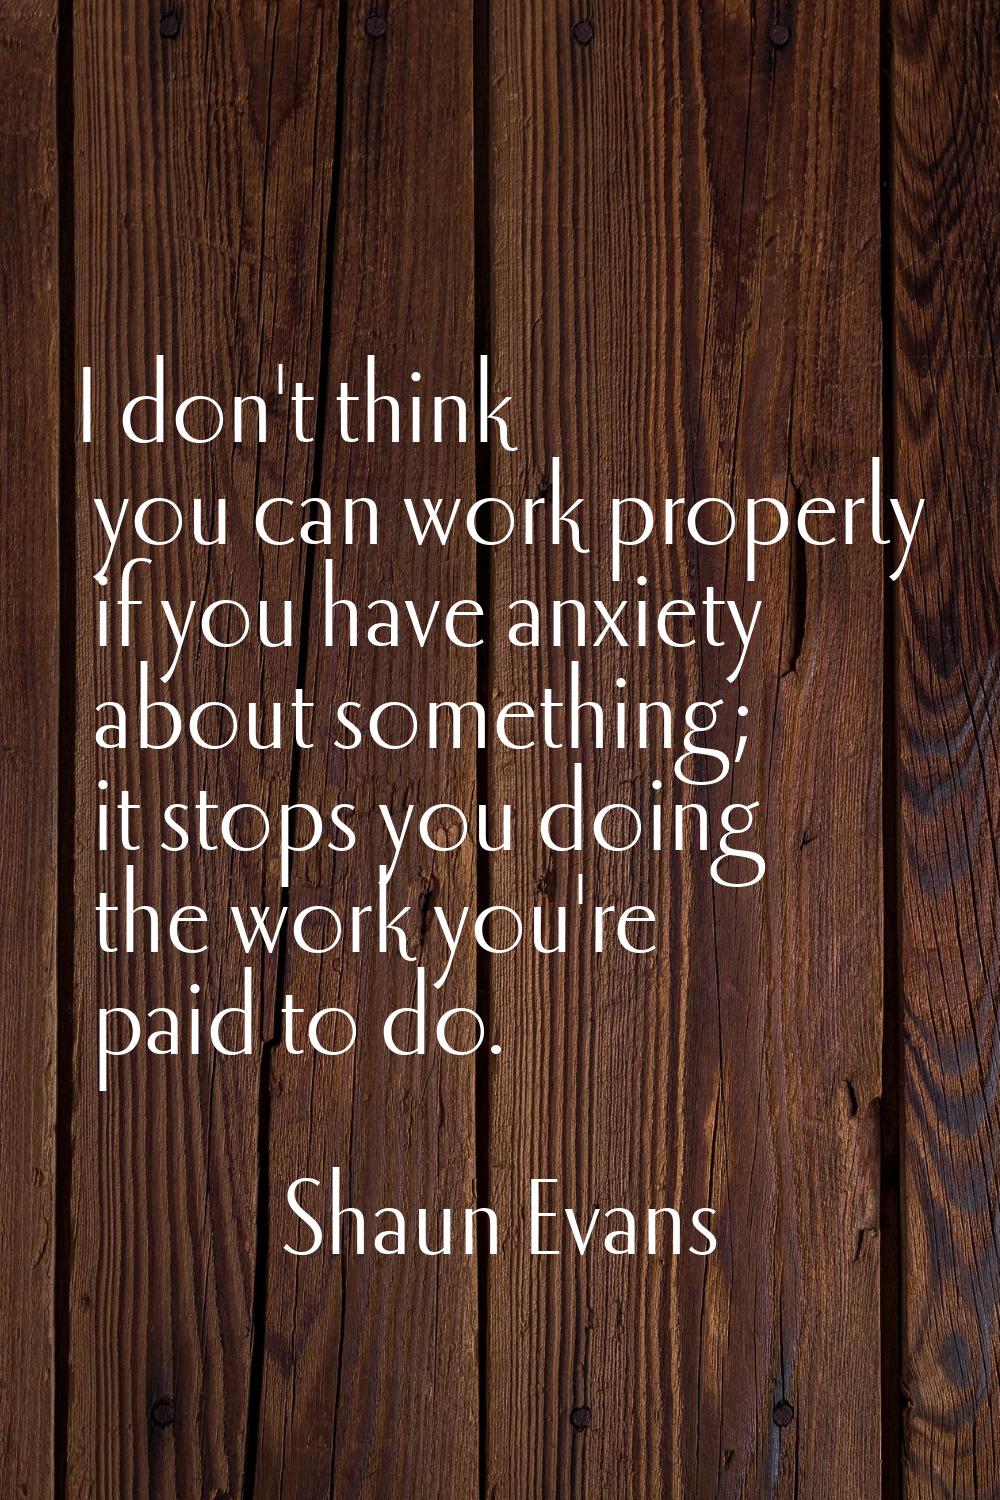 I don't think you can work properly if you have anxiety about something; it stops you doing the wor